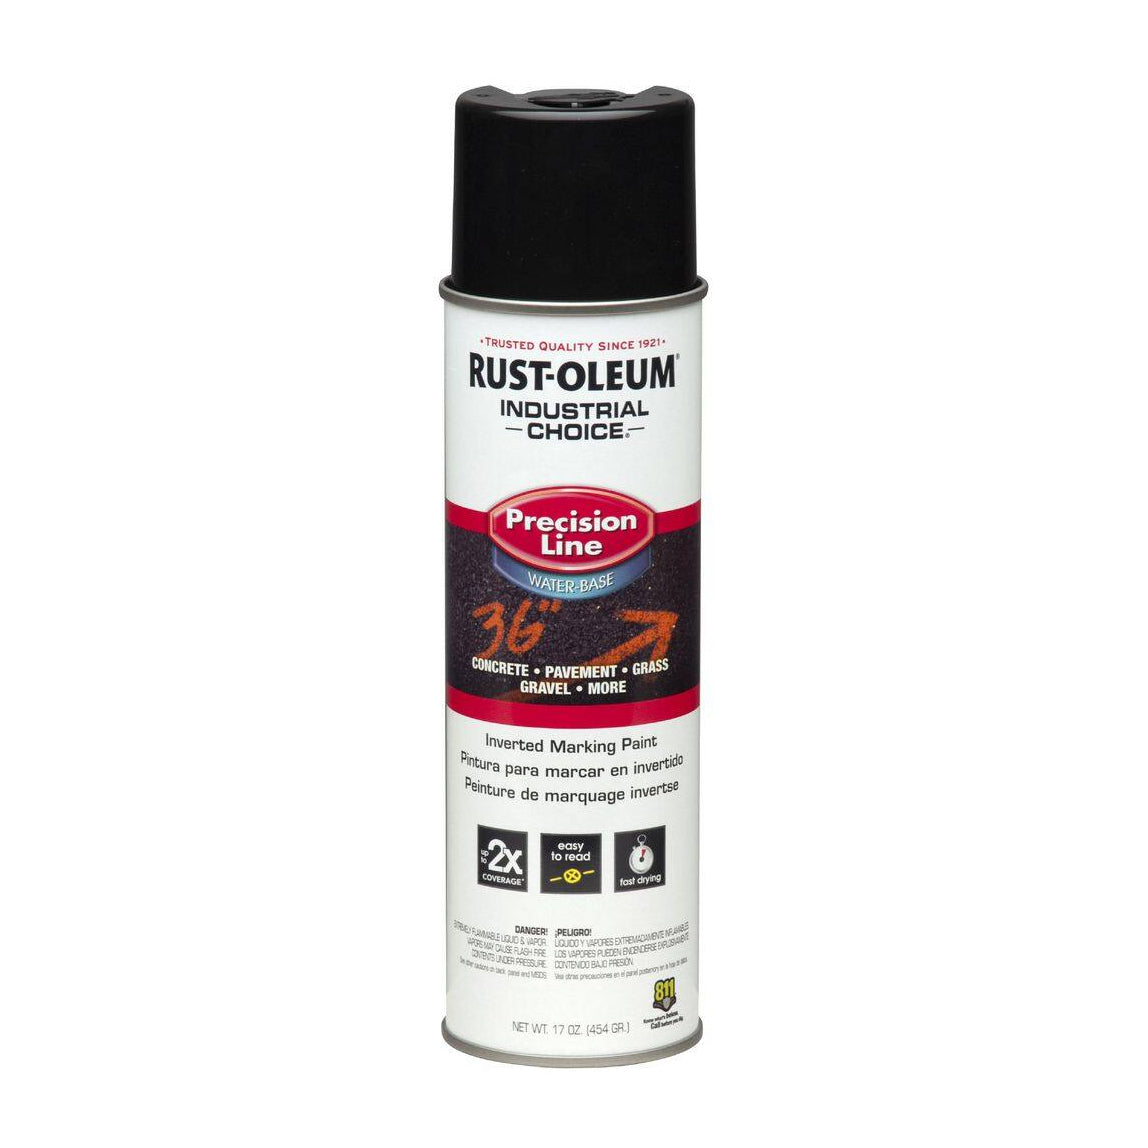 1875838 - M1800 System Water-Based Precision Line Marking Paint - Black